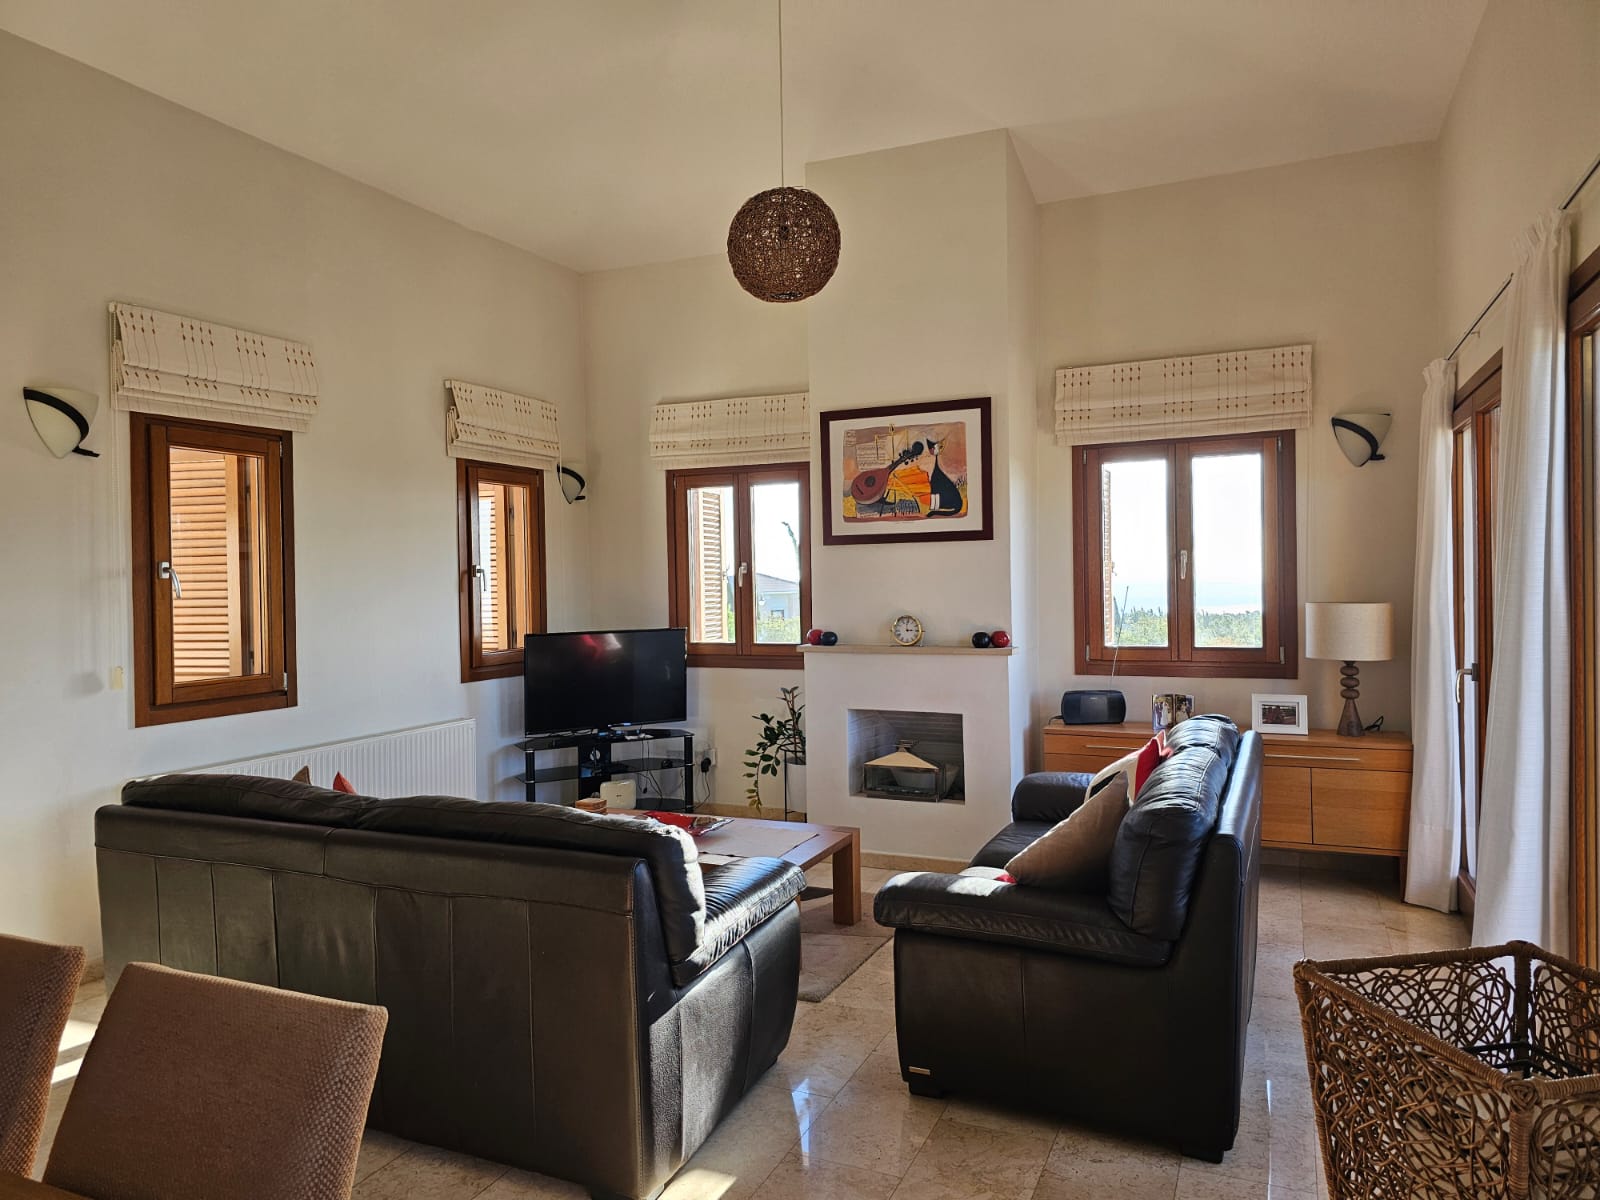 Hauson Realty - Cyprus Real Estate Agents A living room with a fireplace and large windows.